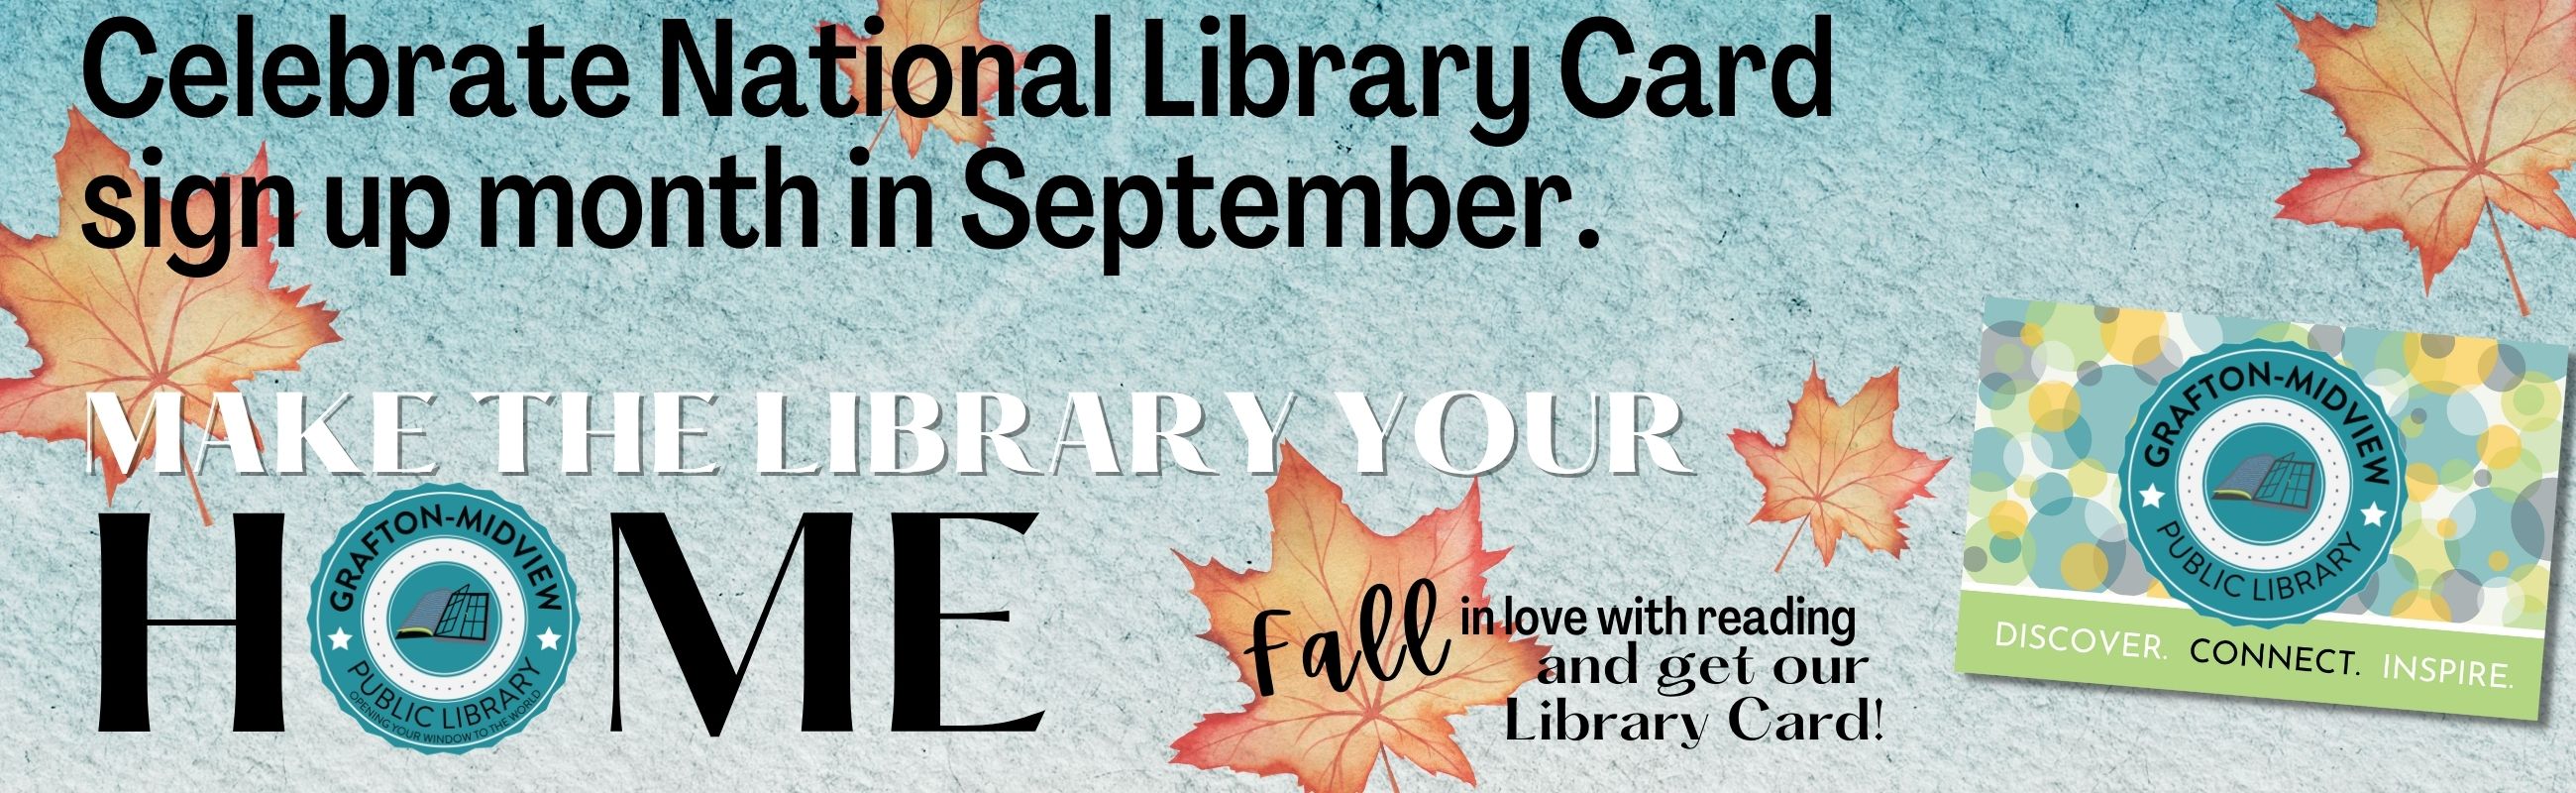 September is National Library Card Sign Up Month